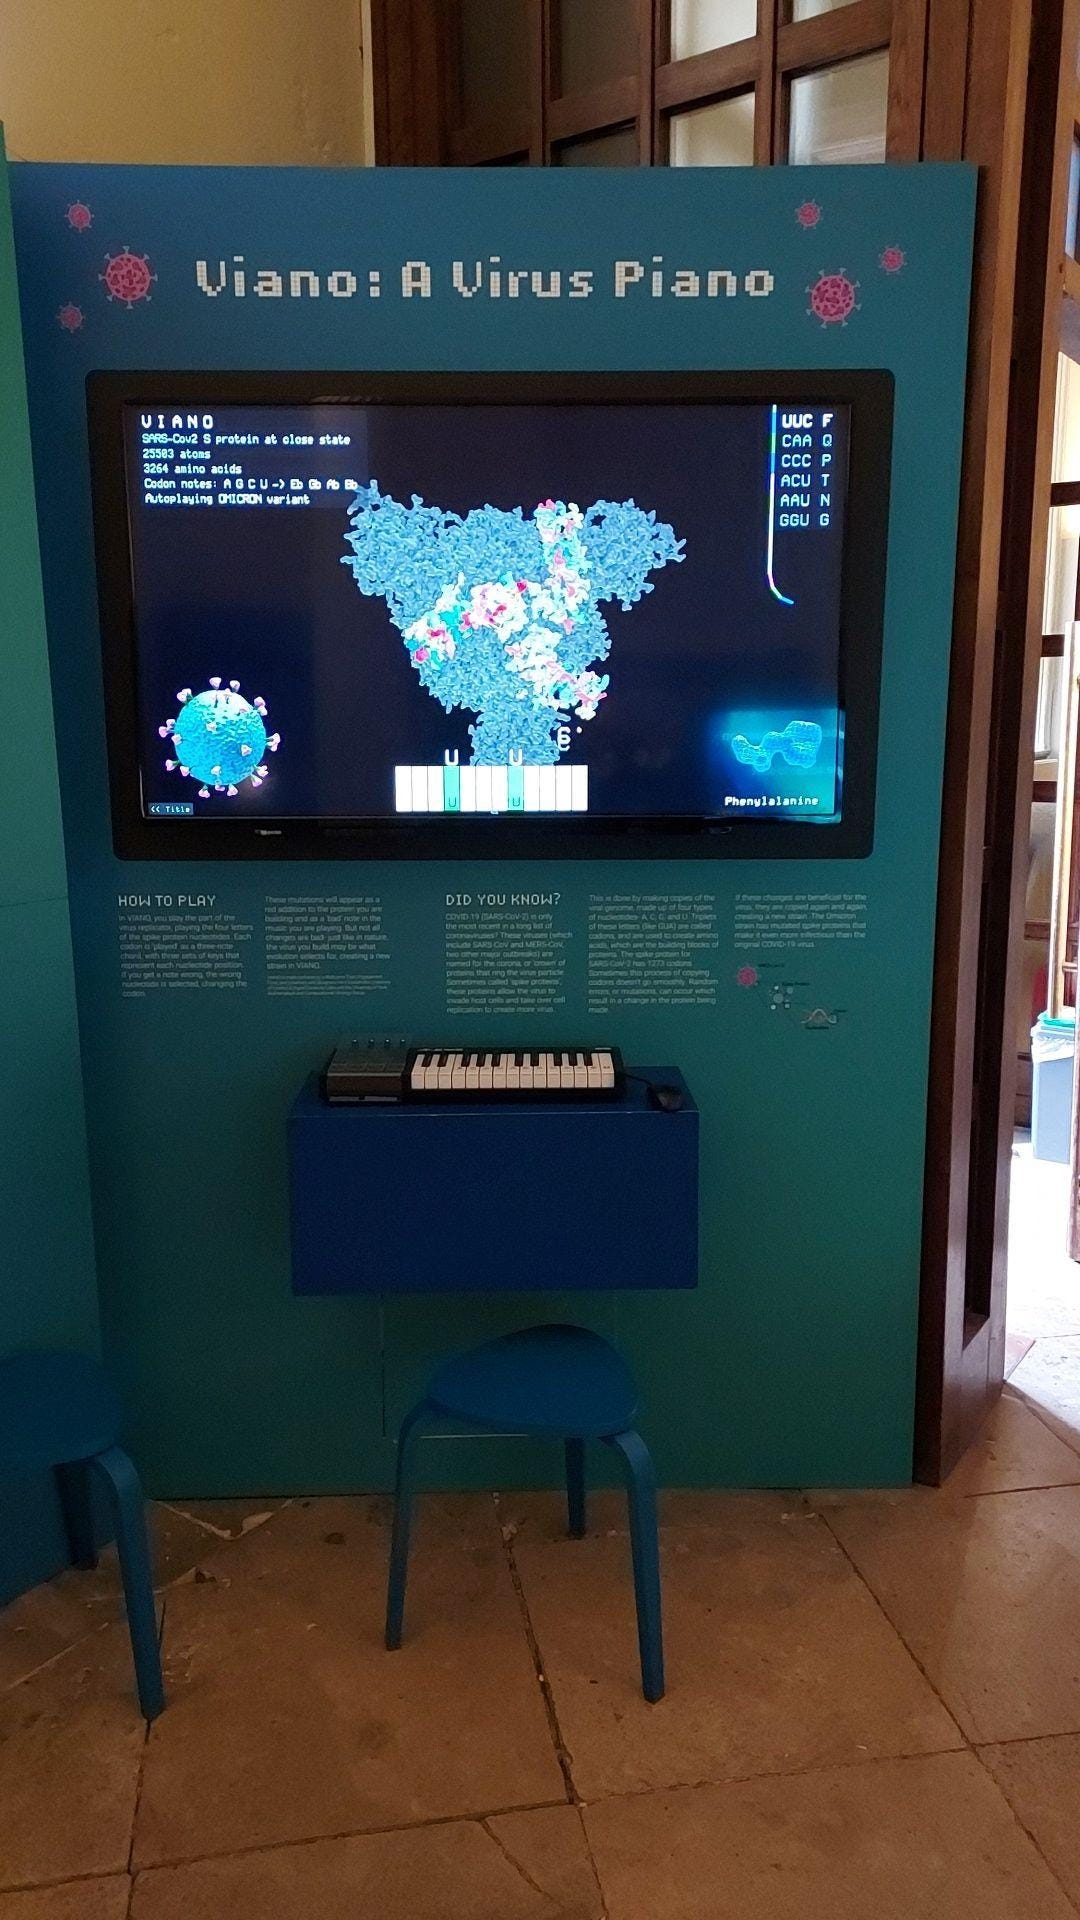 A terrible interactive (on a screen) viano pretenging to be a piano.